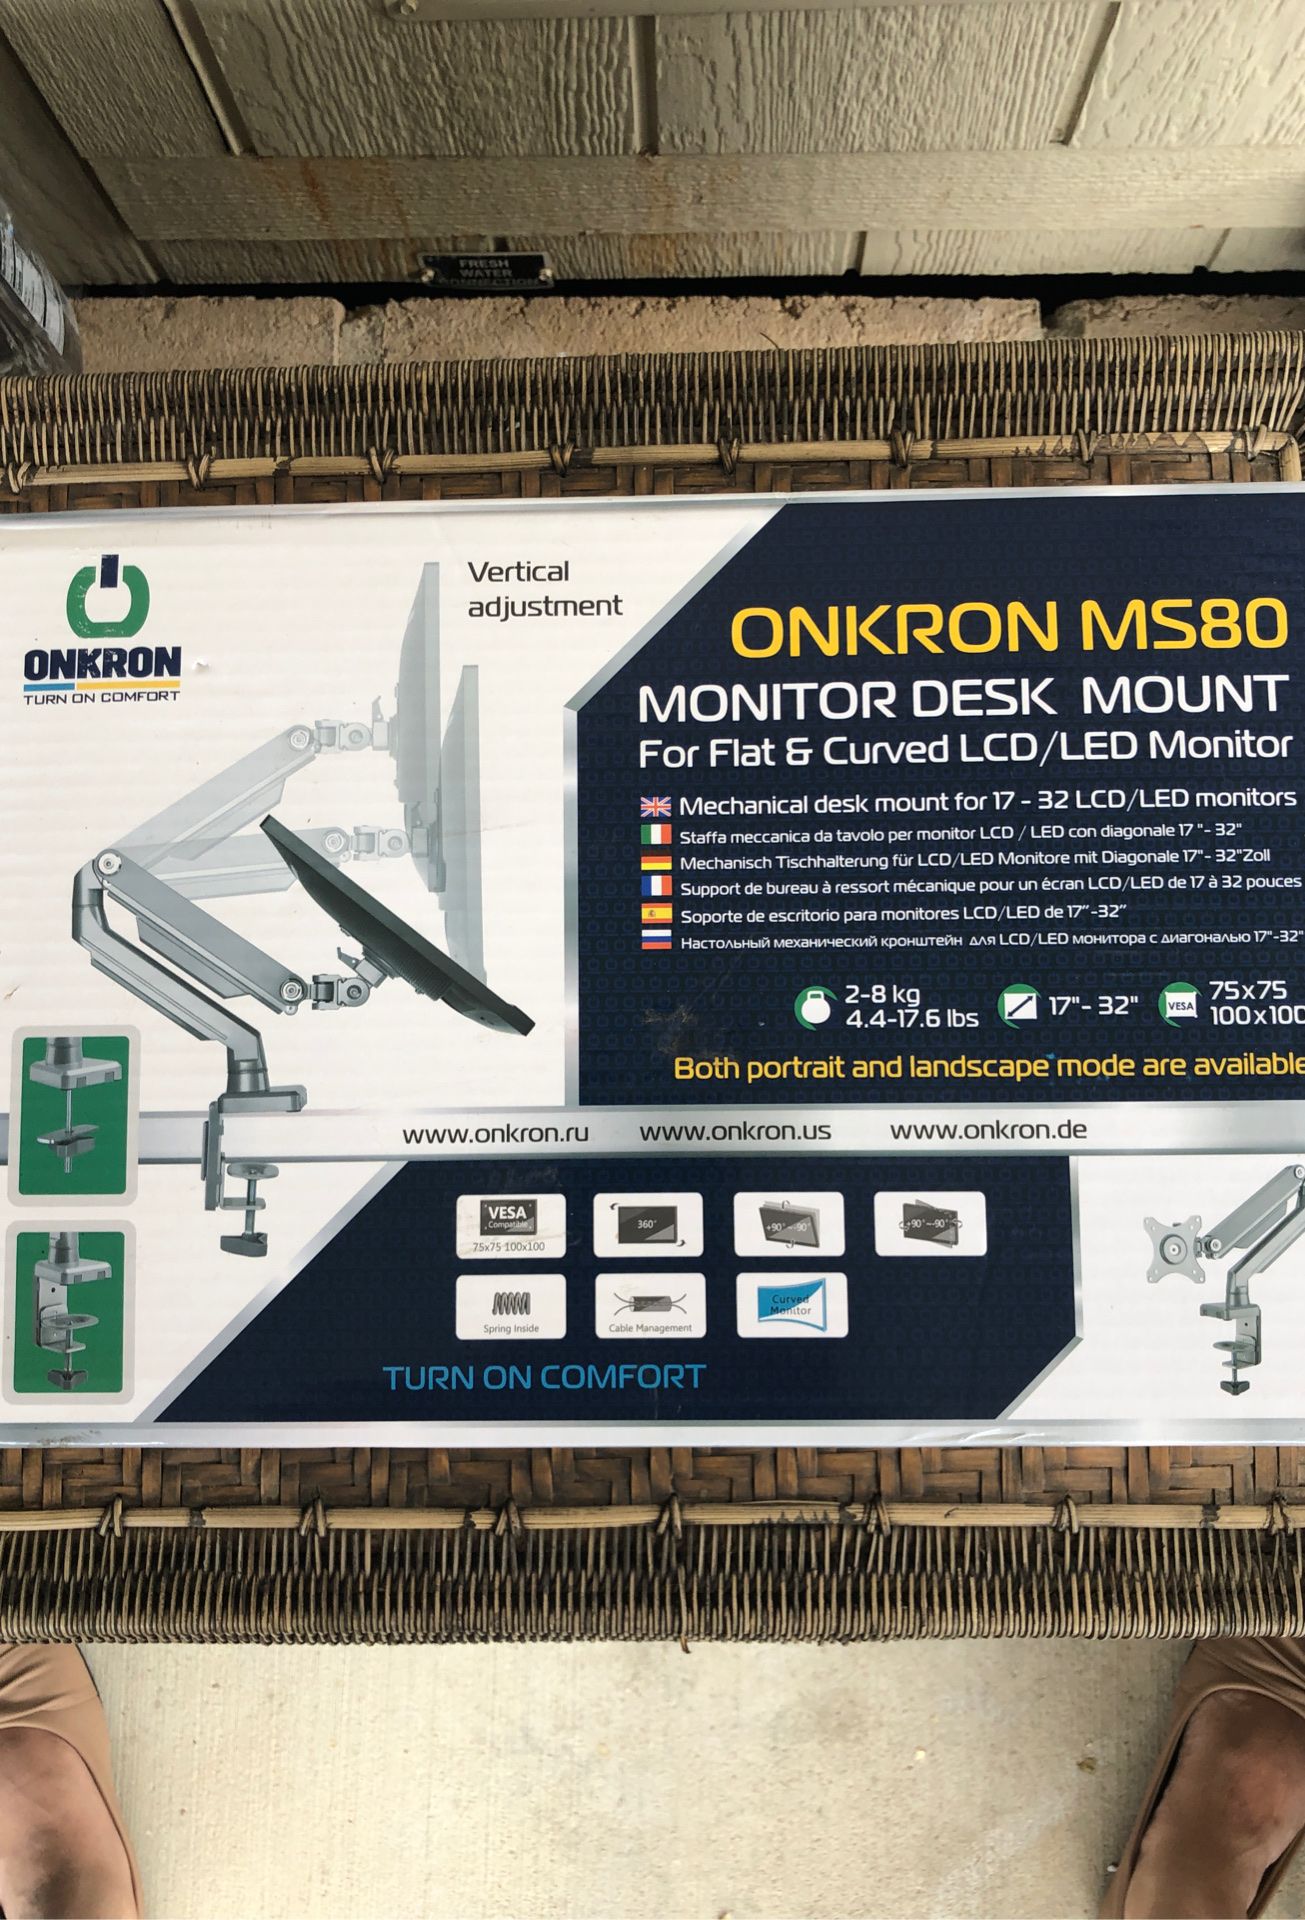 ONKRON Desk Mount Full Motion Arm for Computer Monitors 17 to 32-Inch LED LCD up to 17.6 lbs Silver (MS80)